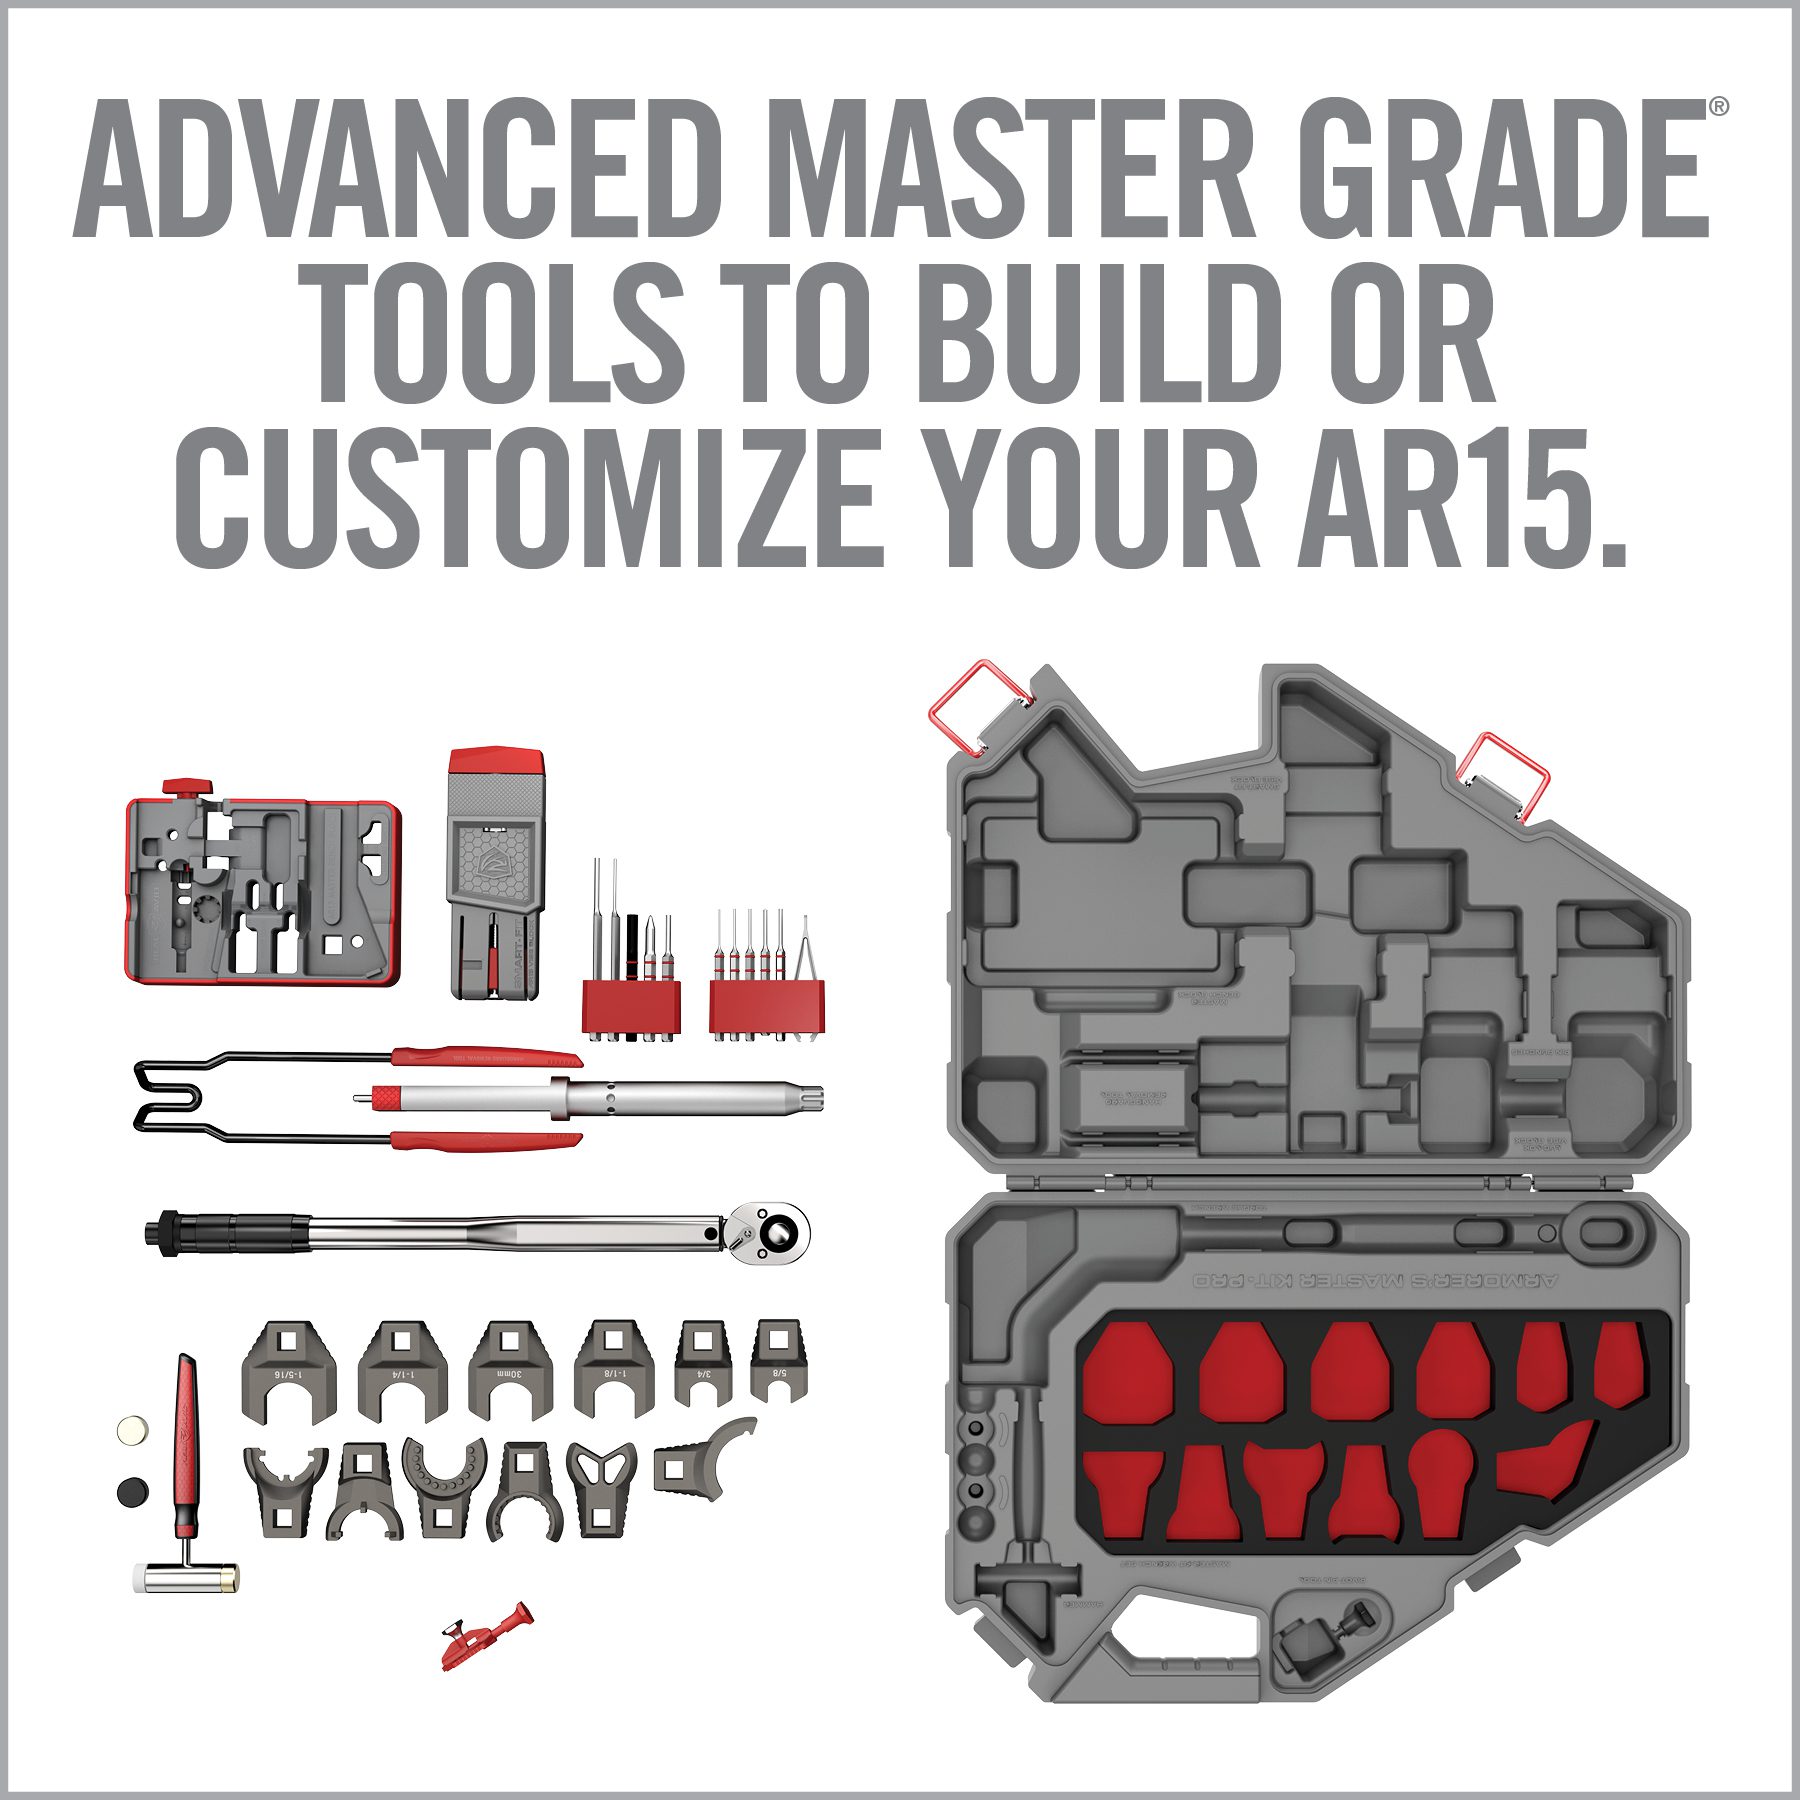 a poster with tools to build or customize your art